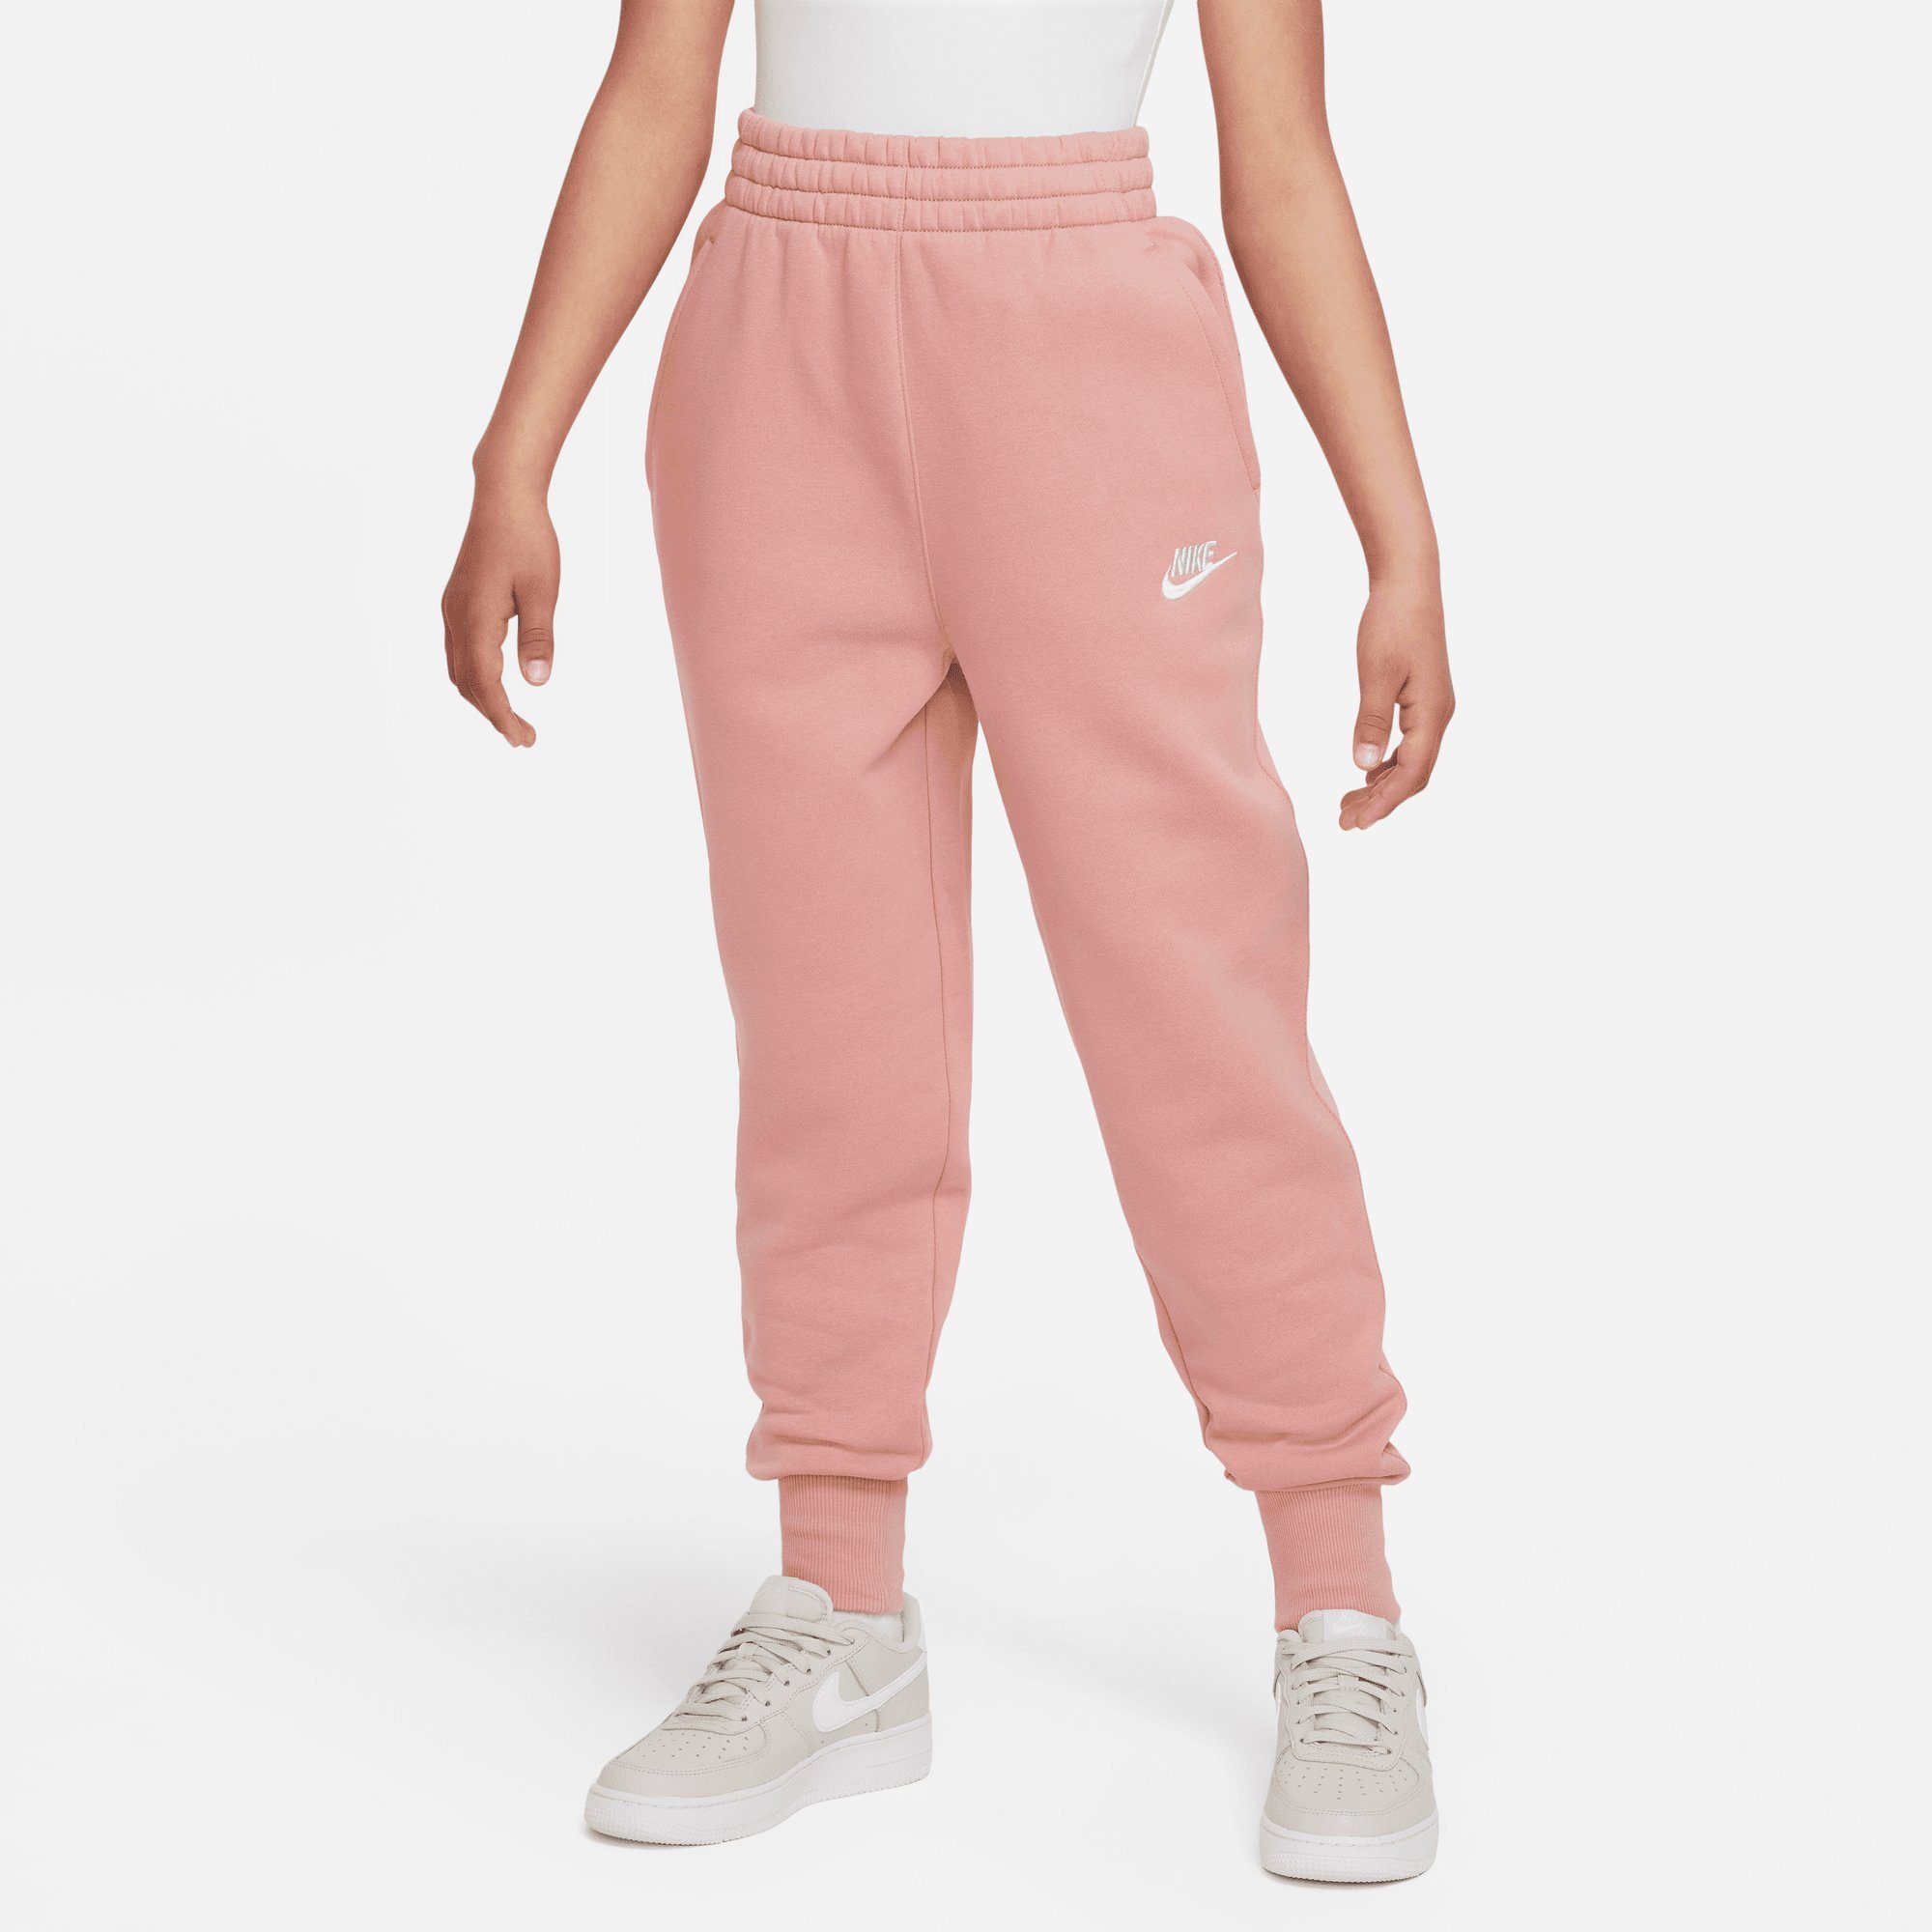 STARDUST/RED (GIRLS) STARDUST/WHITE Sportswear HIGH-WAISTED Jogginghose PANTS Nike BIG CLUB FITTED KIDS' RED FLEECE